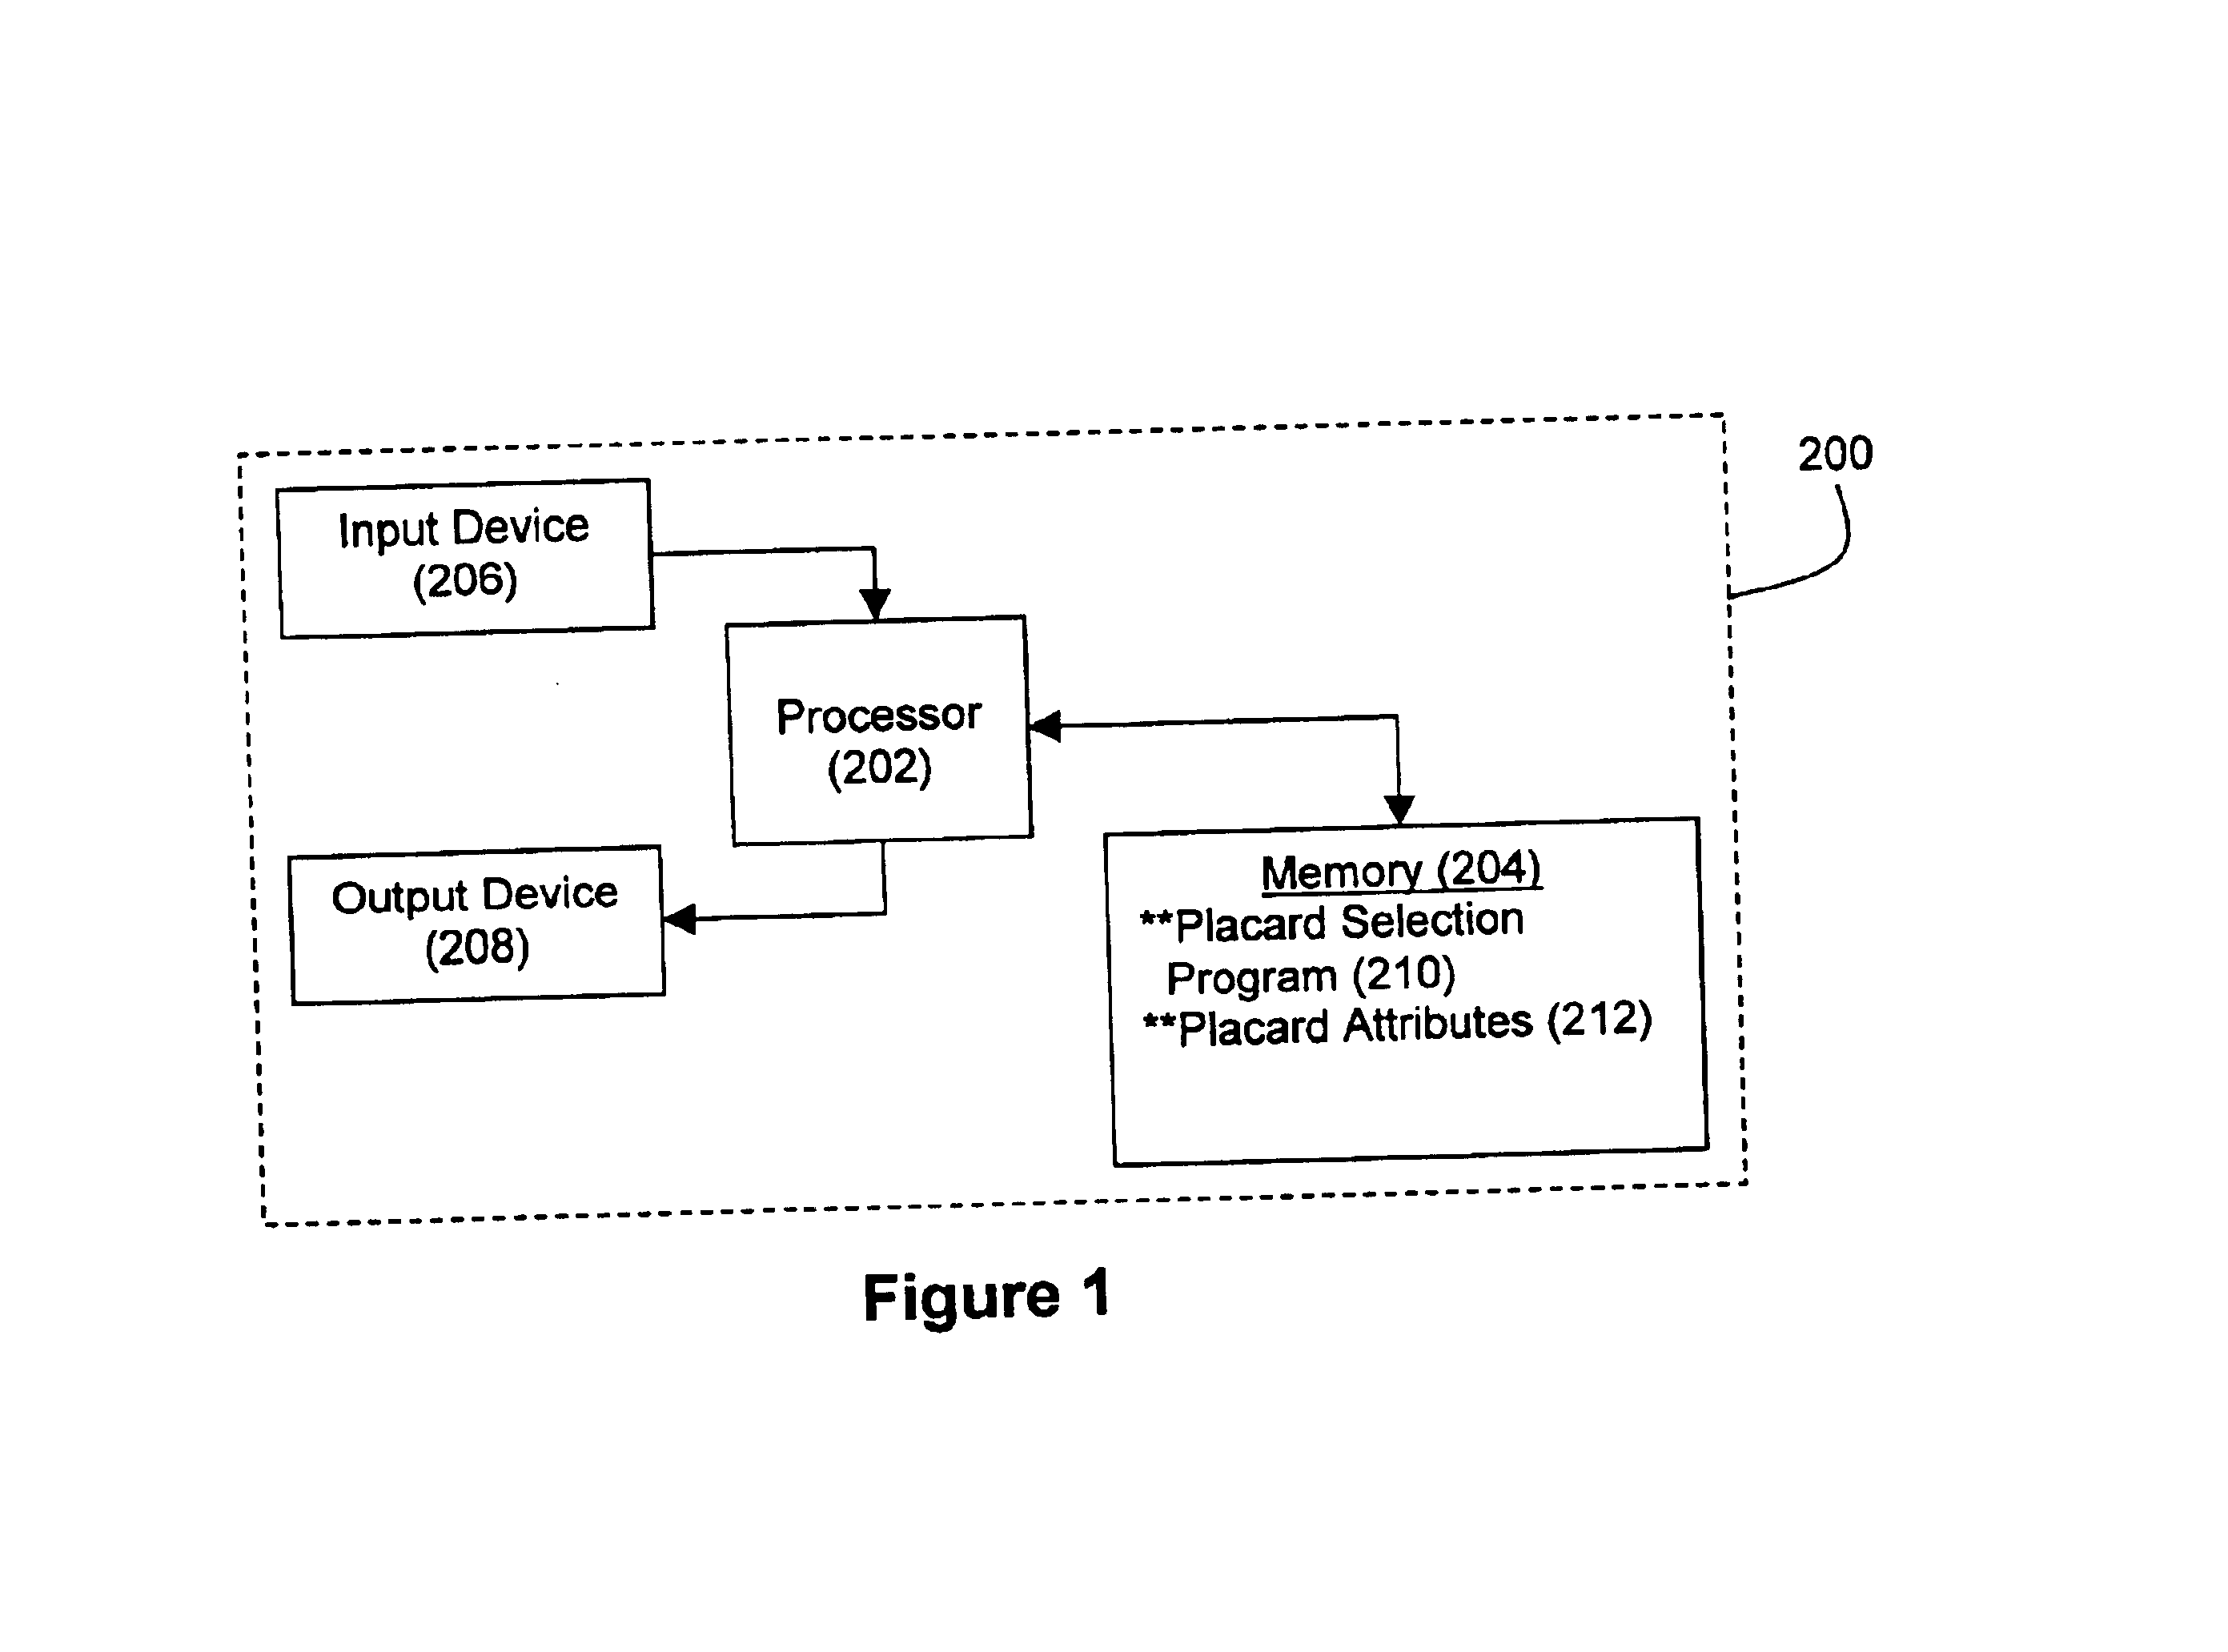 System, method and apparatus for on-demand printing of hazardous materials placards for use in the transportation and/or storage of hazardous materials